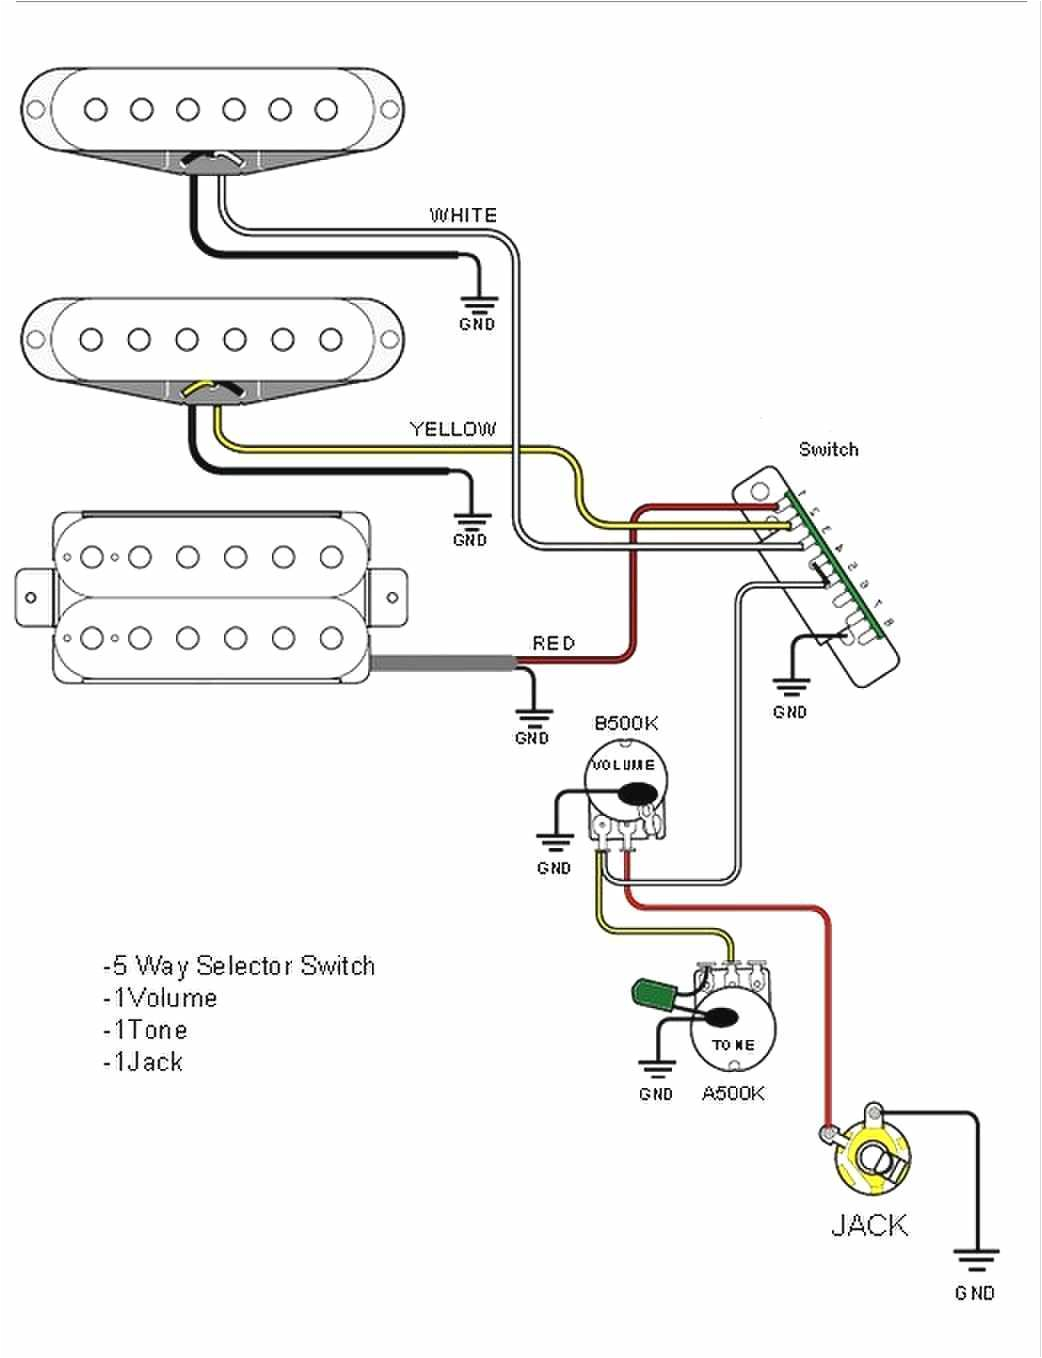 hsh 5 way import switch wiring a guitar wiring kit best of guitar wiring diagram hsh